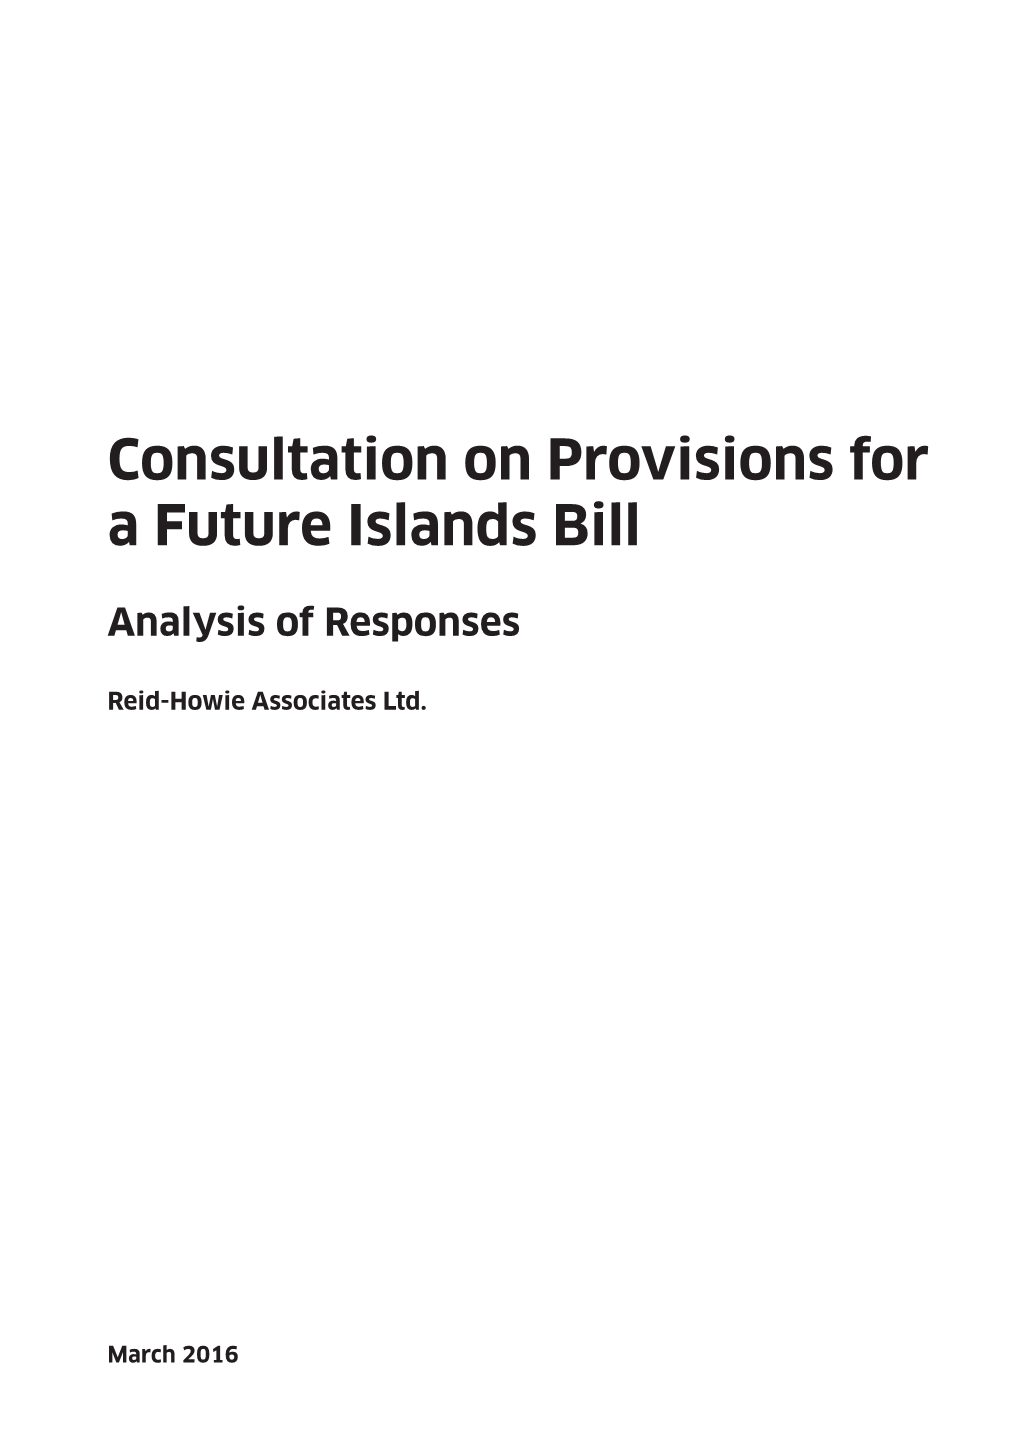 Consultation on Provisions for a Future Islands Bill: Analysis Of